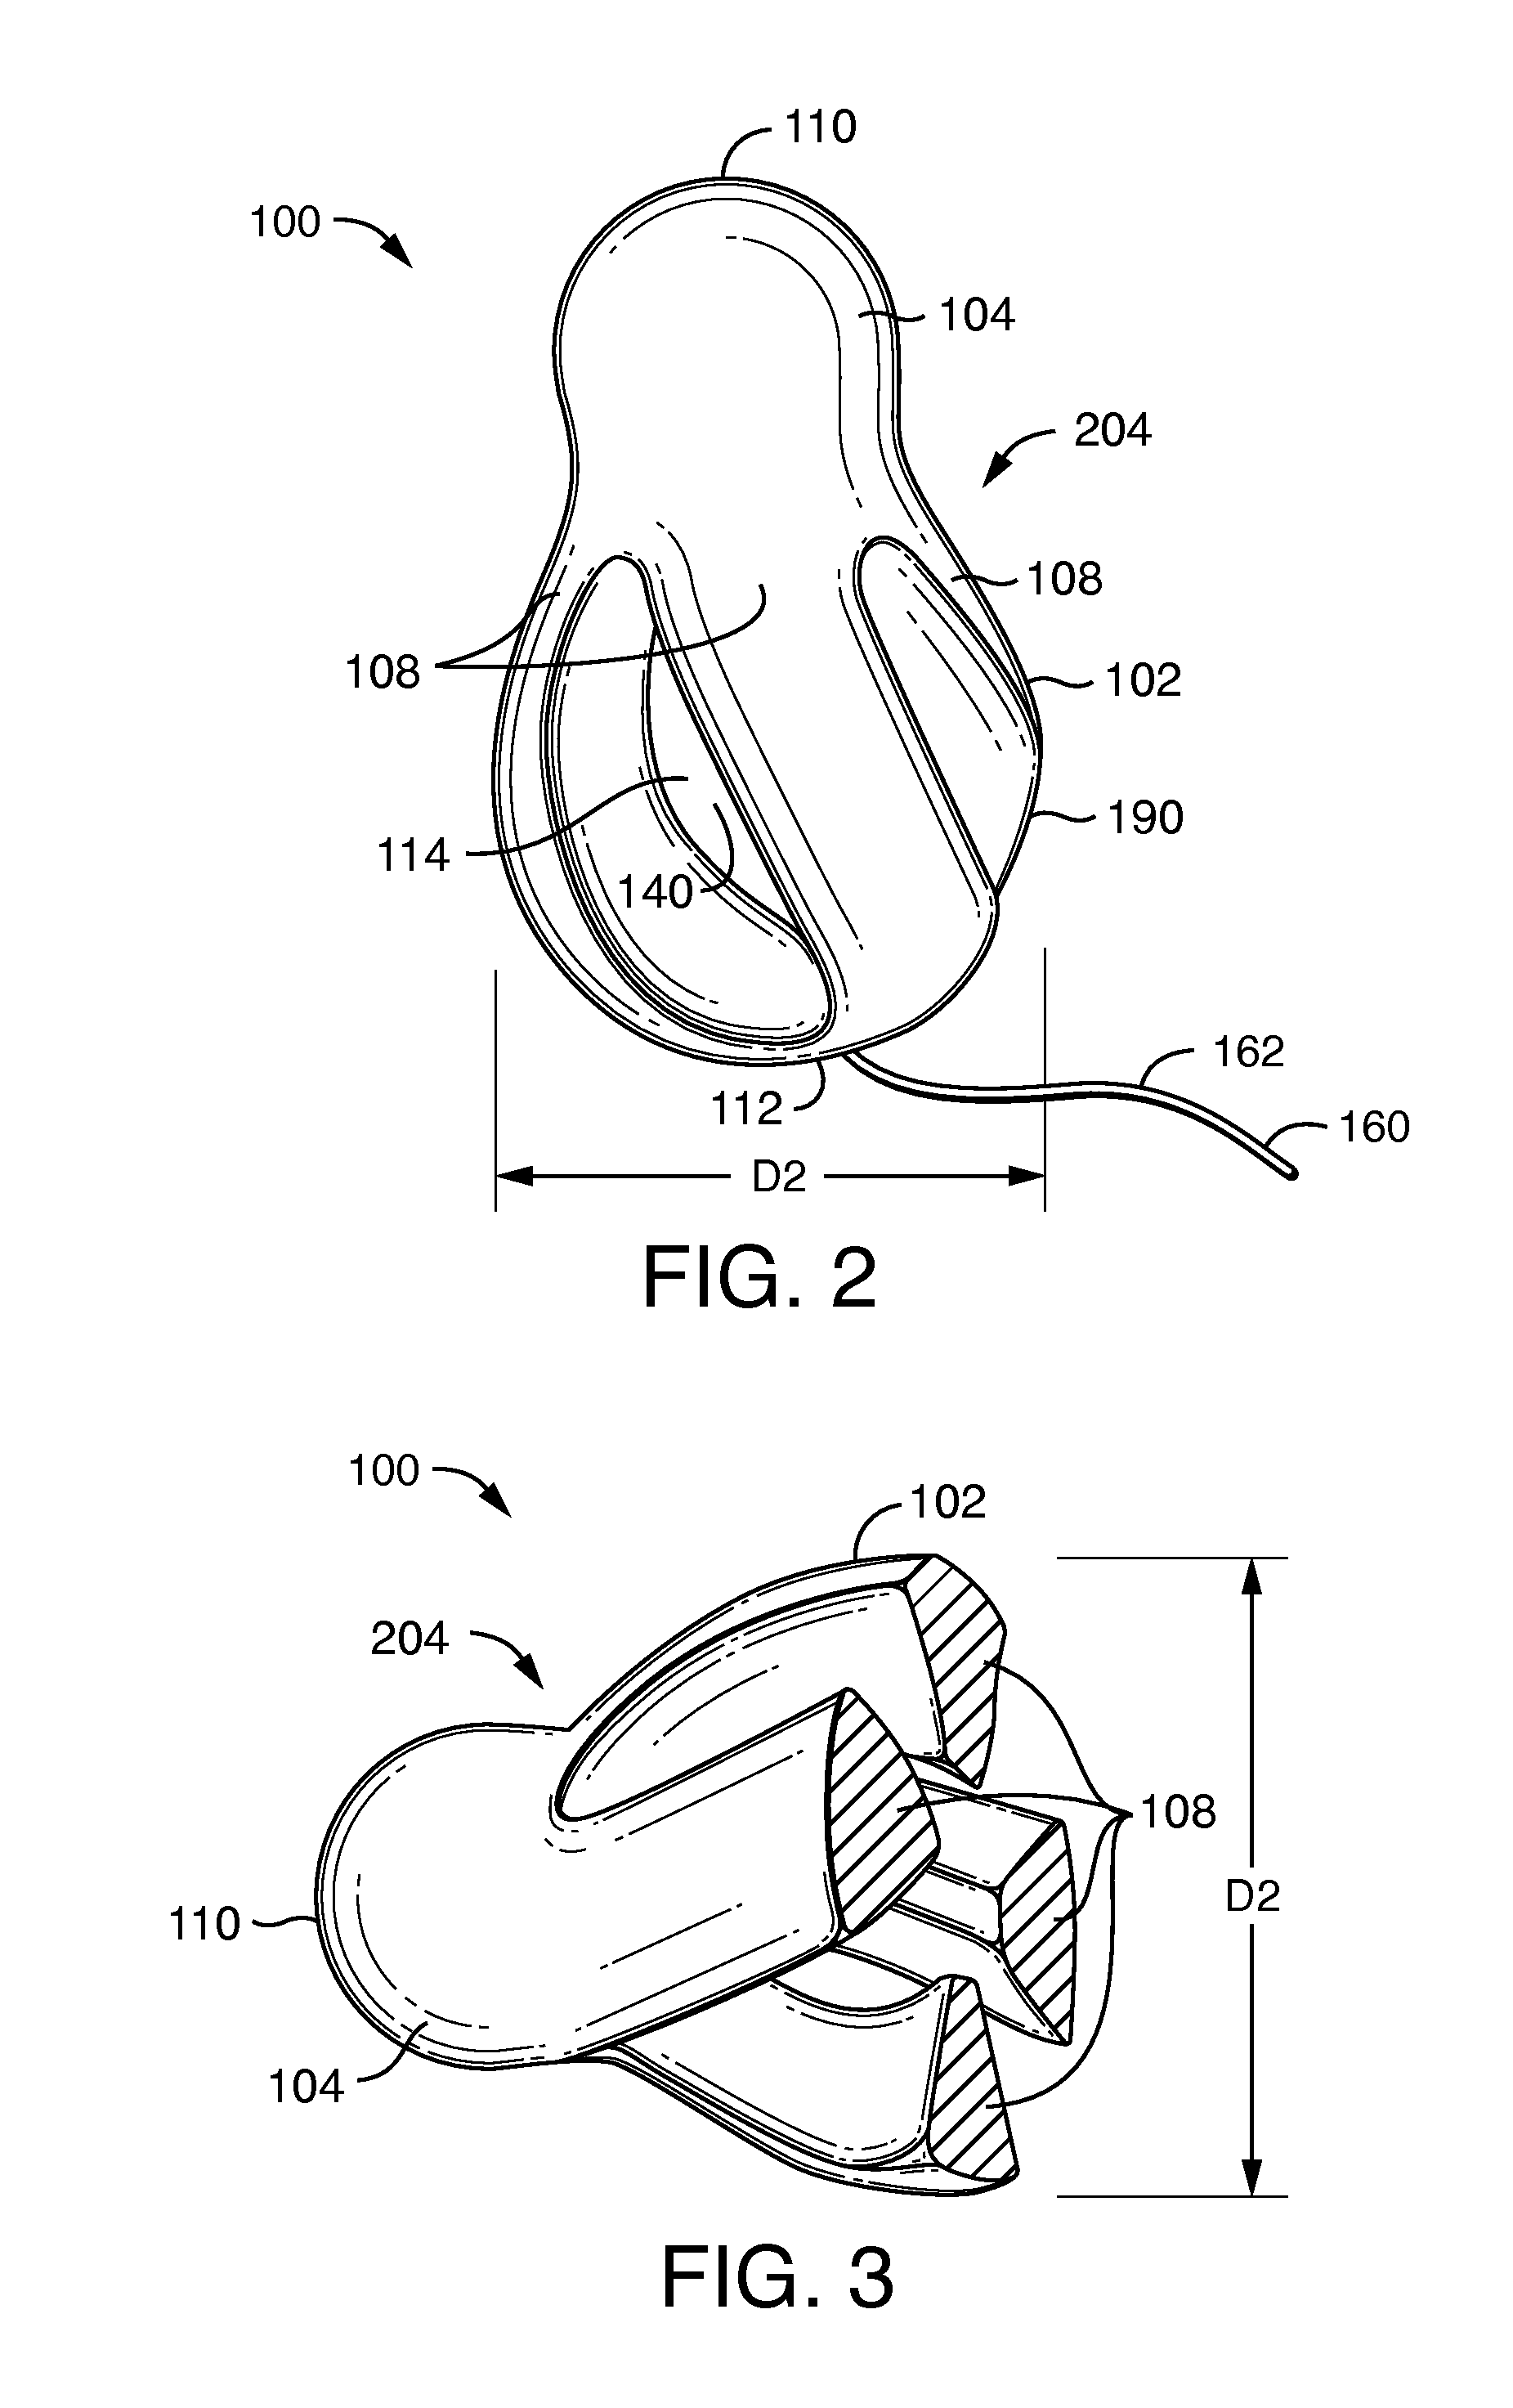 Vaginal Insert Device Having a Support Portion with Plurality of Struts